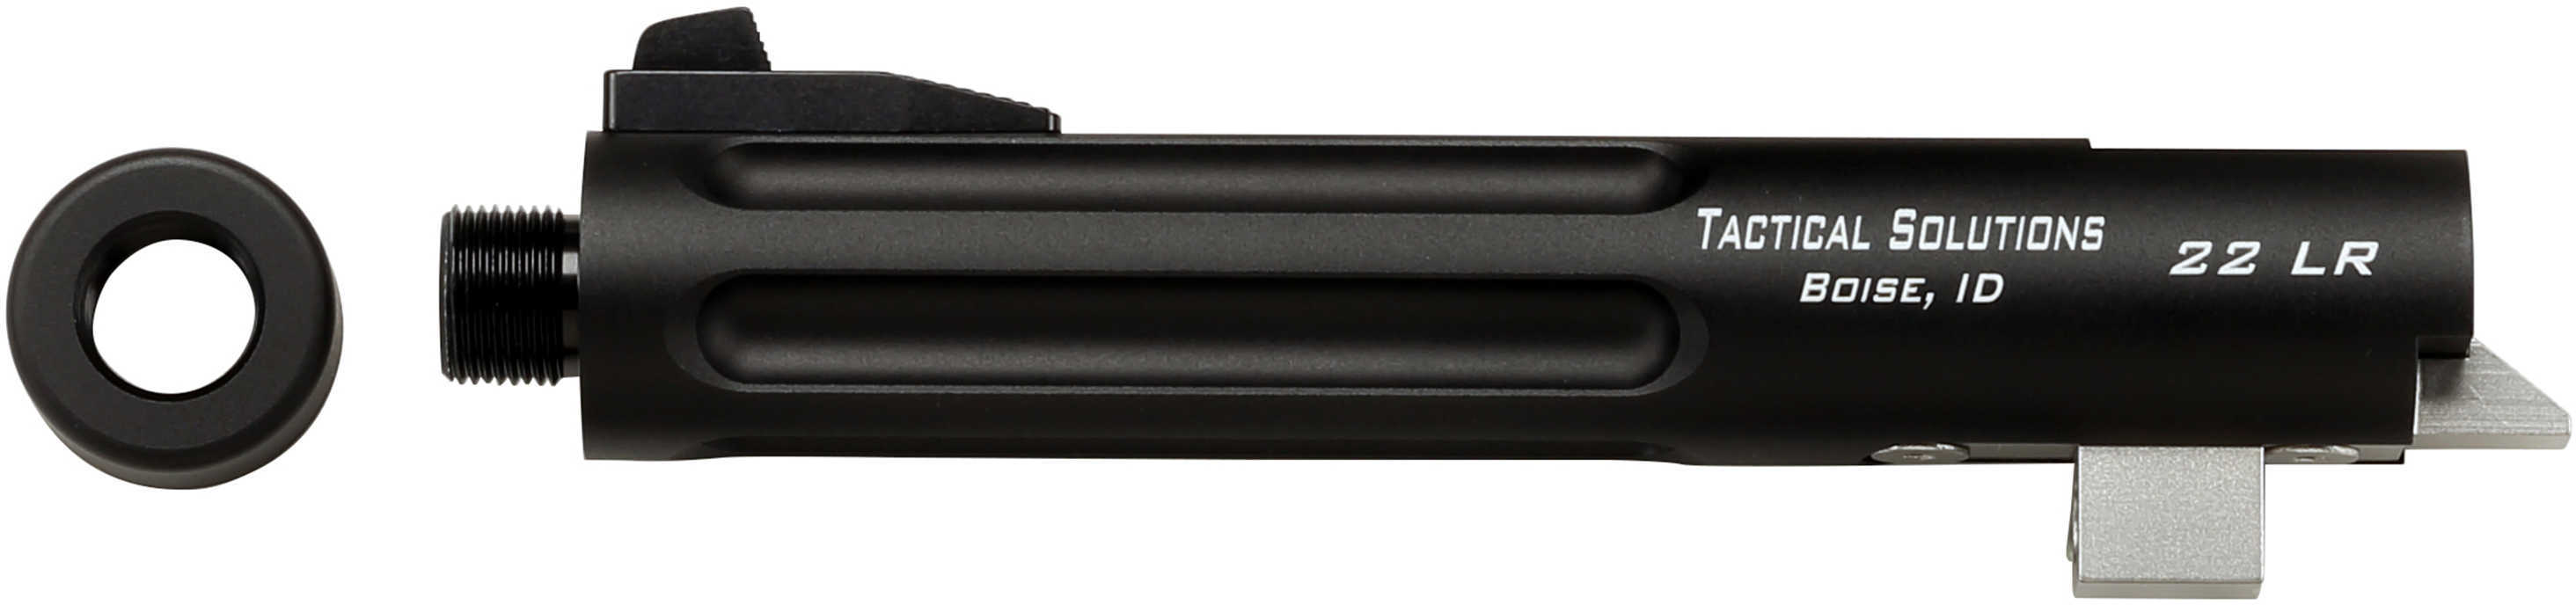 Tactical Solutions Trail-Lite Barrel 22LR 5.5" Threaded & Fluted Matte Black Finish 1/2x28 Threads Fits Browning